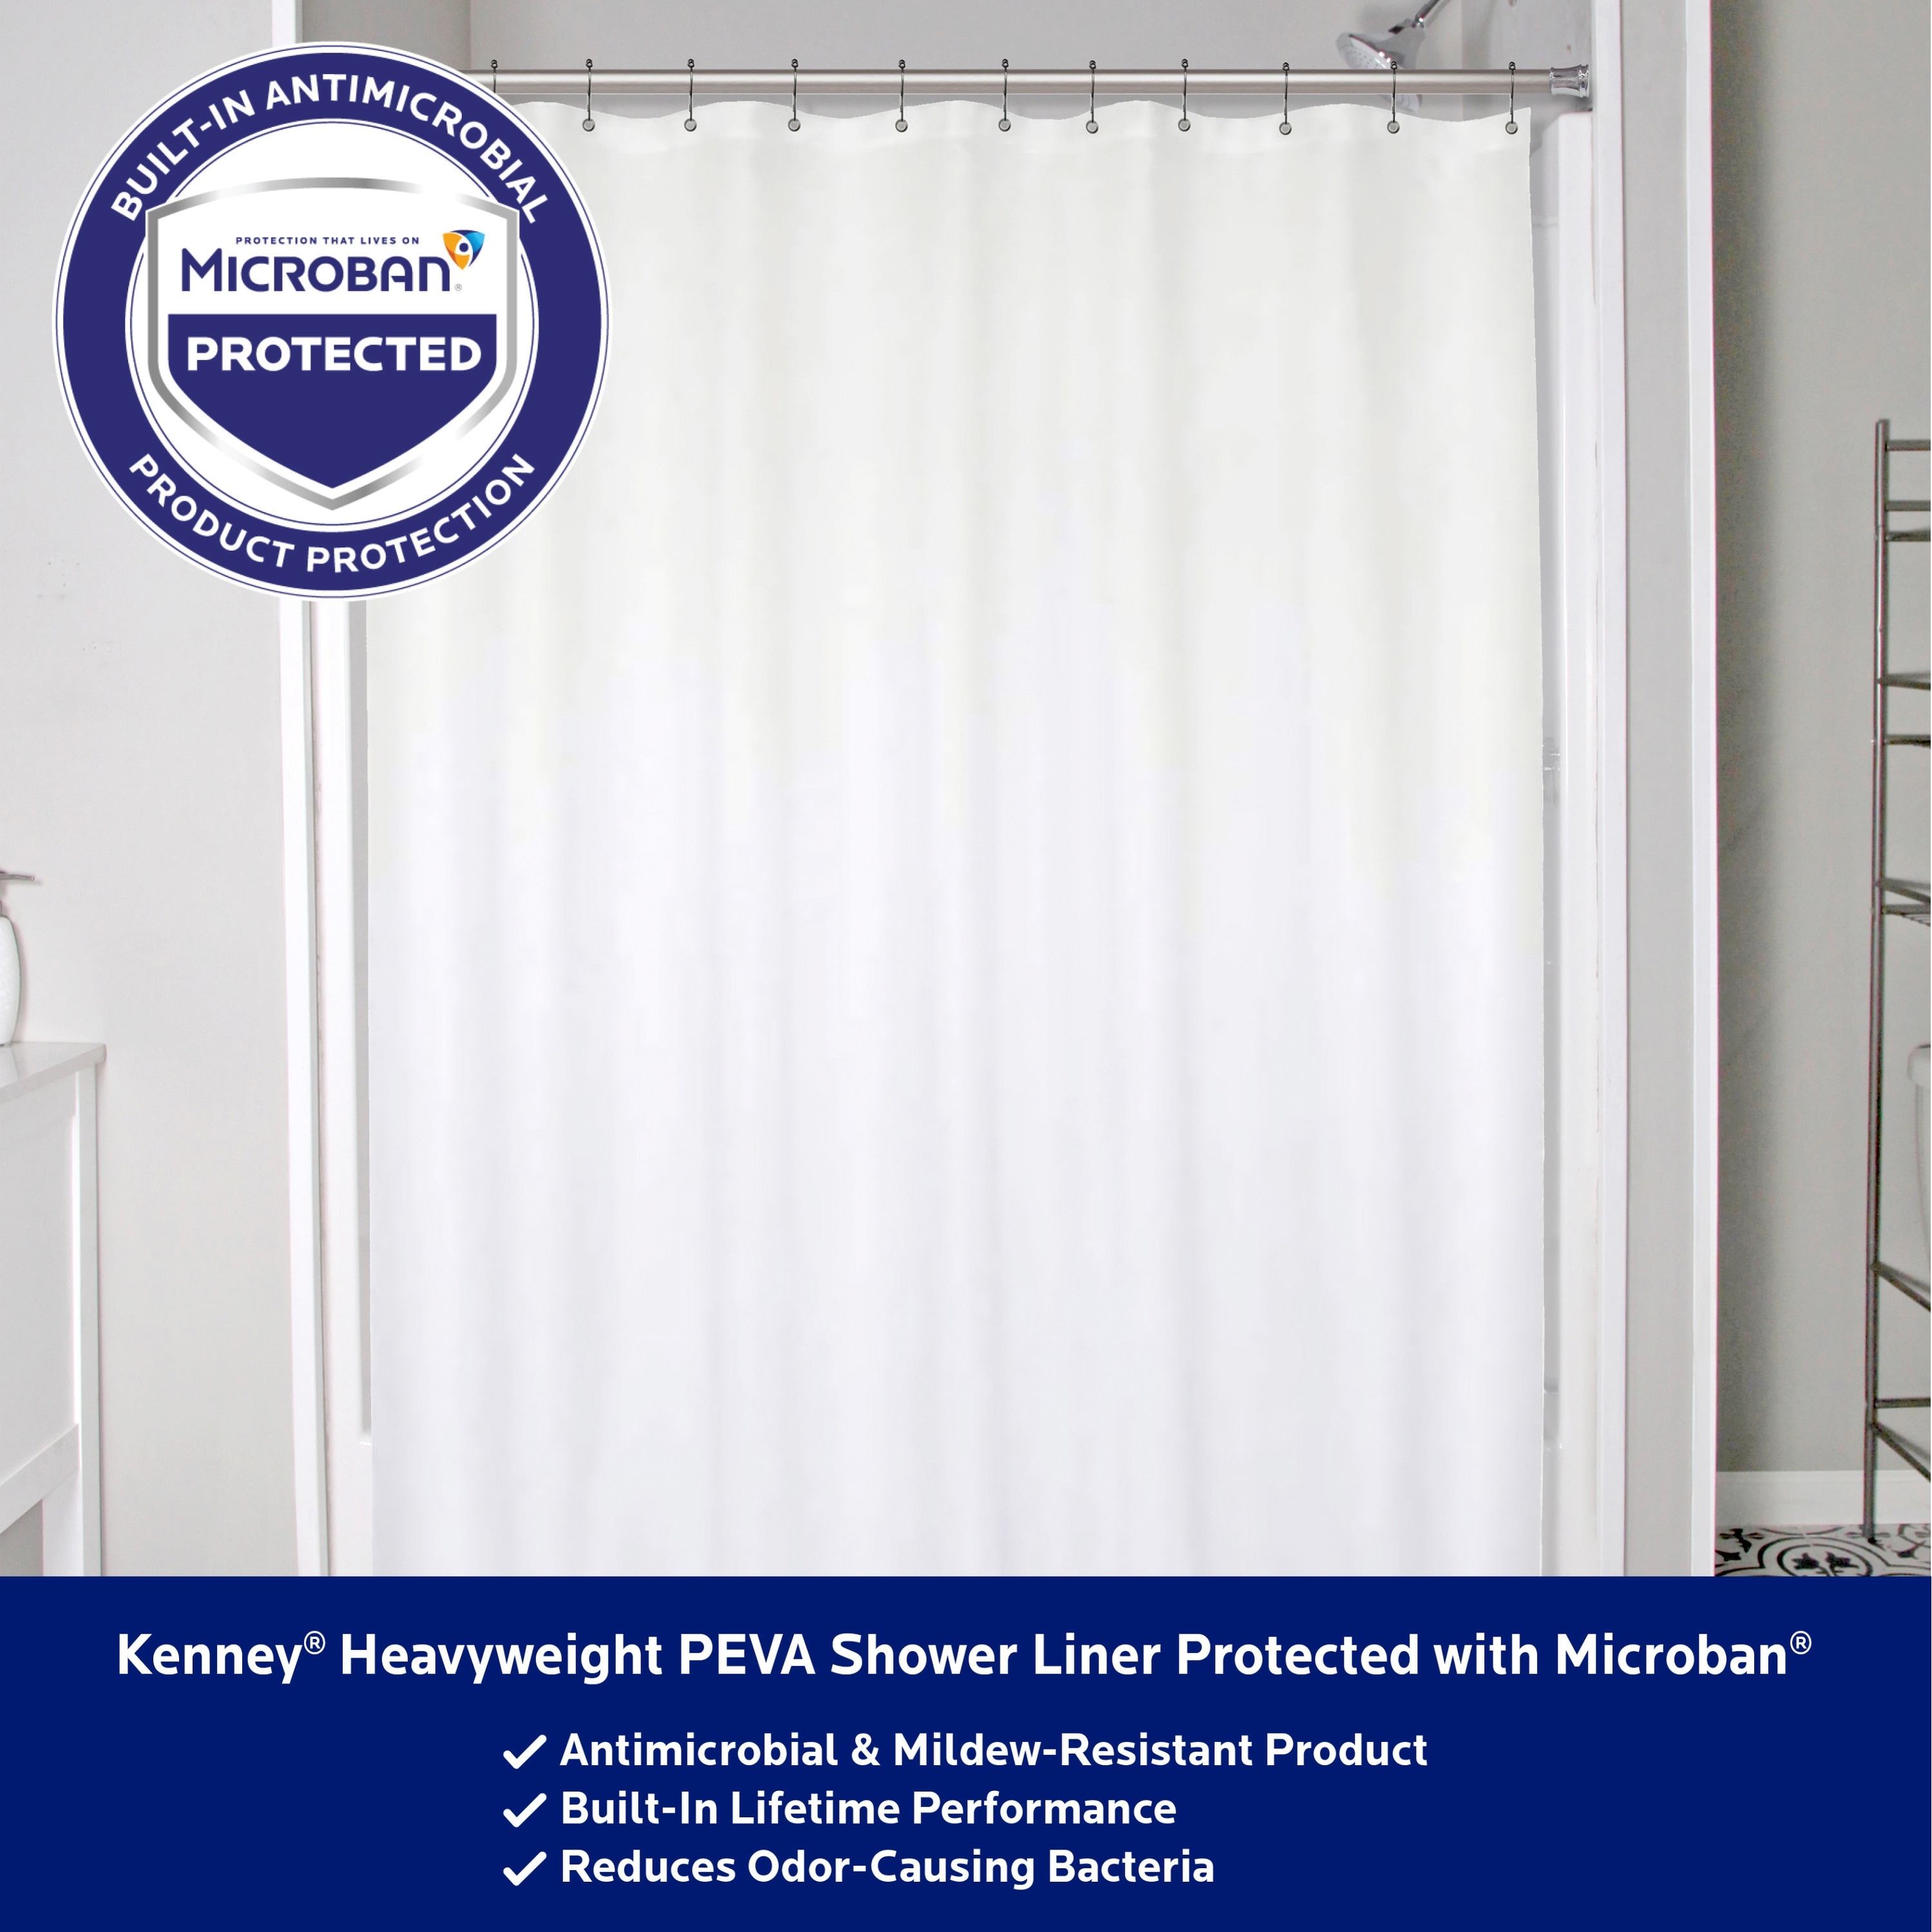 Kenney Microban Protected Heavyweight PEVA Shower Liner, 70 W x